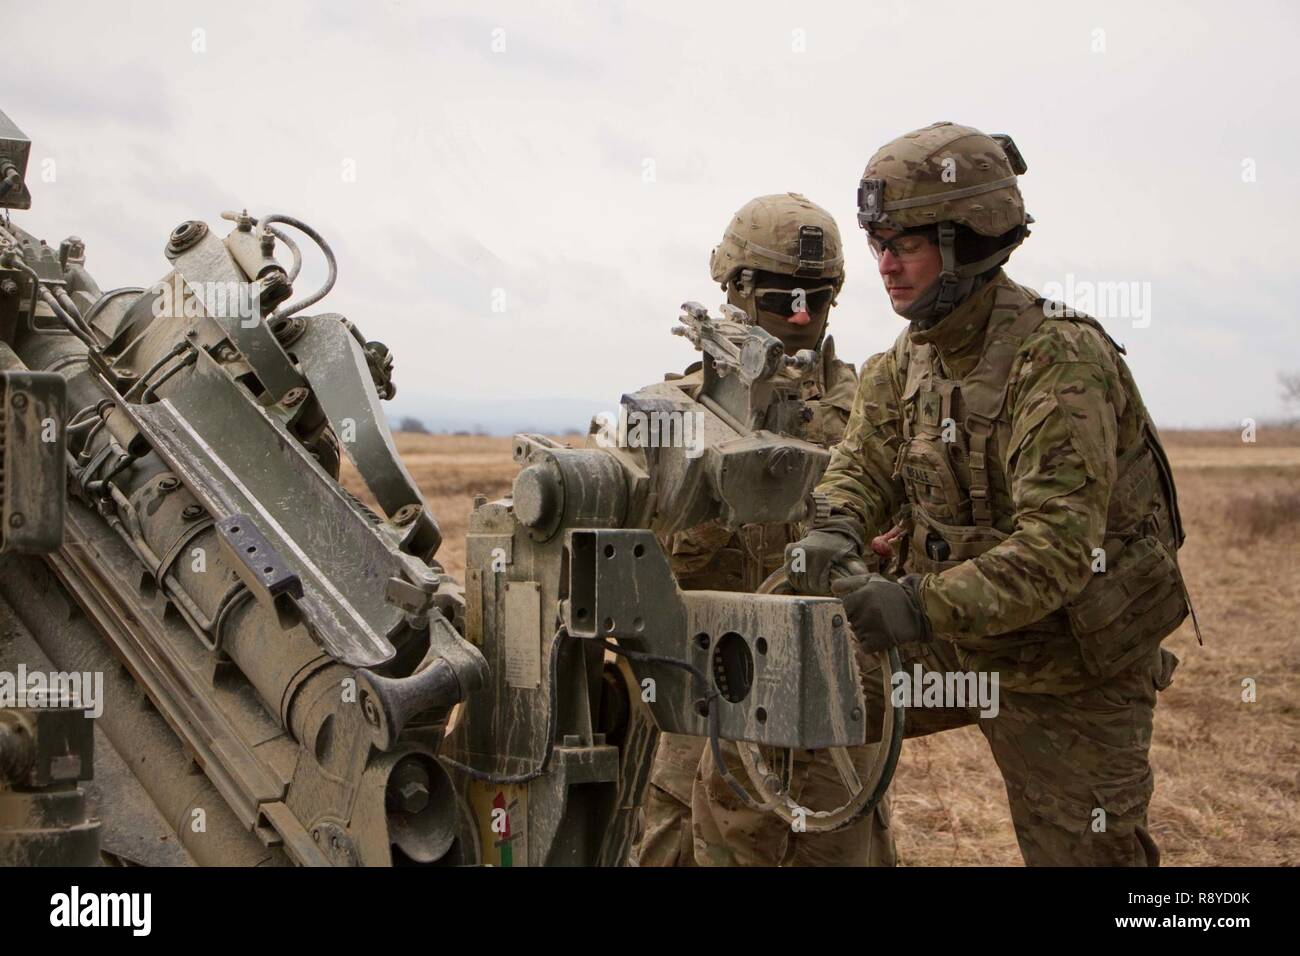 Sgt. David Beale (front), assistant gunner, and Spc. Vincent Ventarola, both members of the gun crew for 1st Section, 1st Platoon, Cobra Battery, Field Artillery Squadron, 2d Cavalry Regiment, U.S. Army, conduct a fire mission with their M777A2 Howitzer during a March 8, 2017 in the Grafenwoehr Training Area, Germany. The Squadron participated in Dynamic Front II March 6-9, 2017. The exercise enabled the U.S., Germany and Czech Republic to synchronize their artillery capabilities. Stock Photo